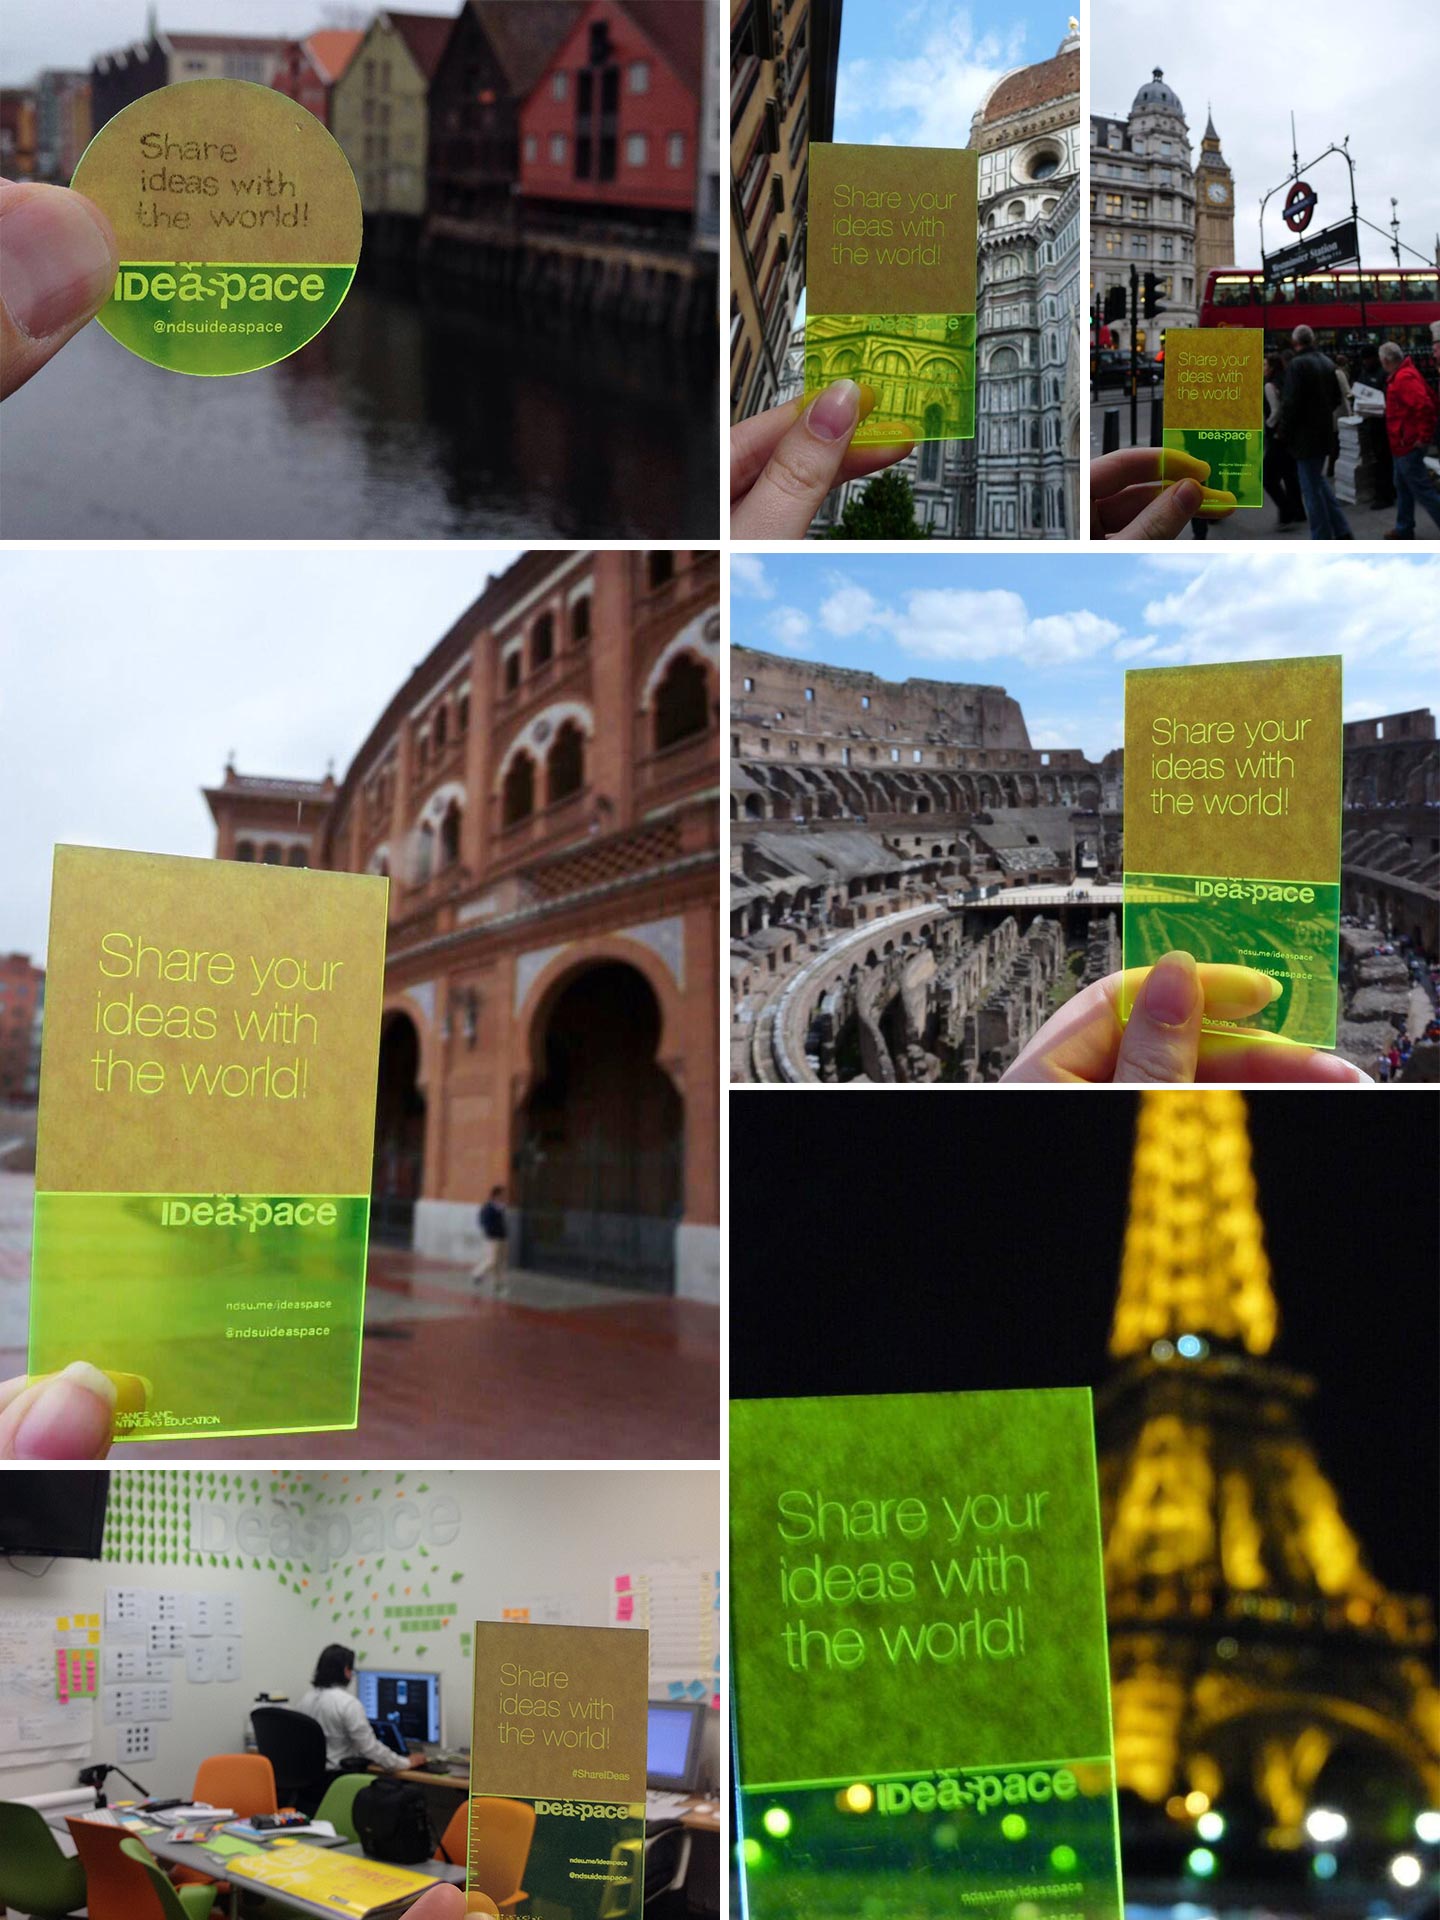 A grid of photos of hands holding lime green acrylic in front of famous landmarks across the world